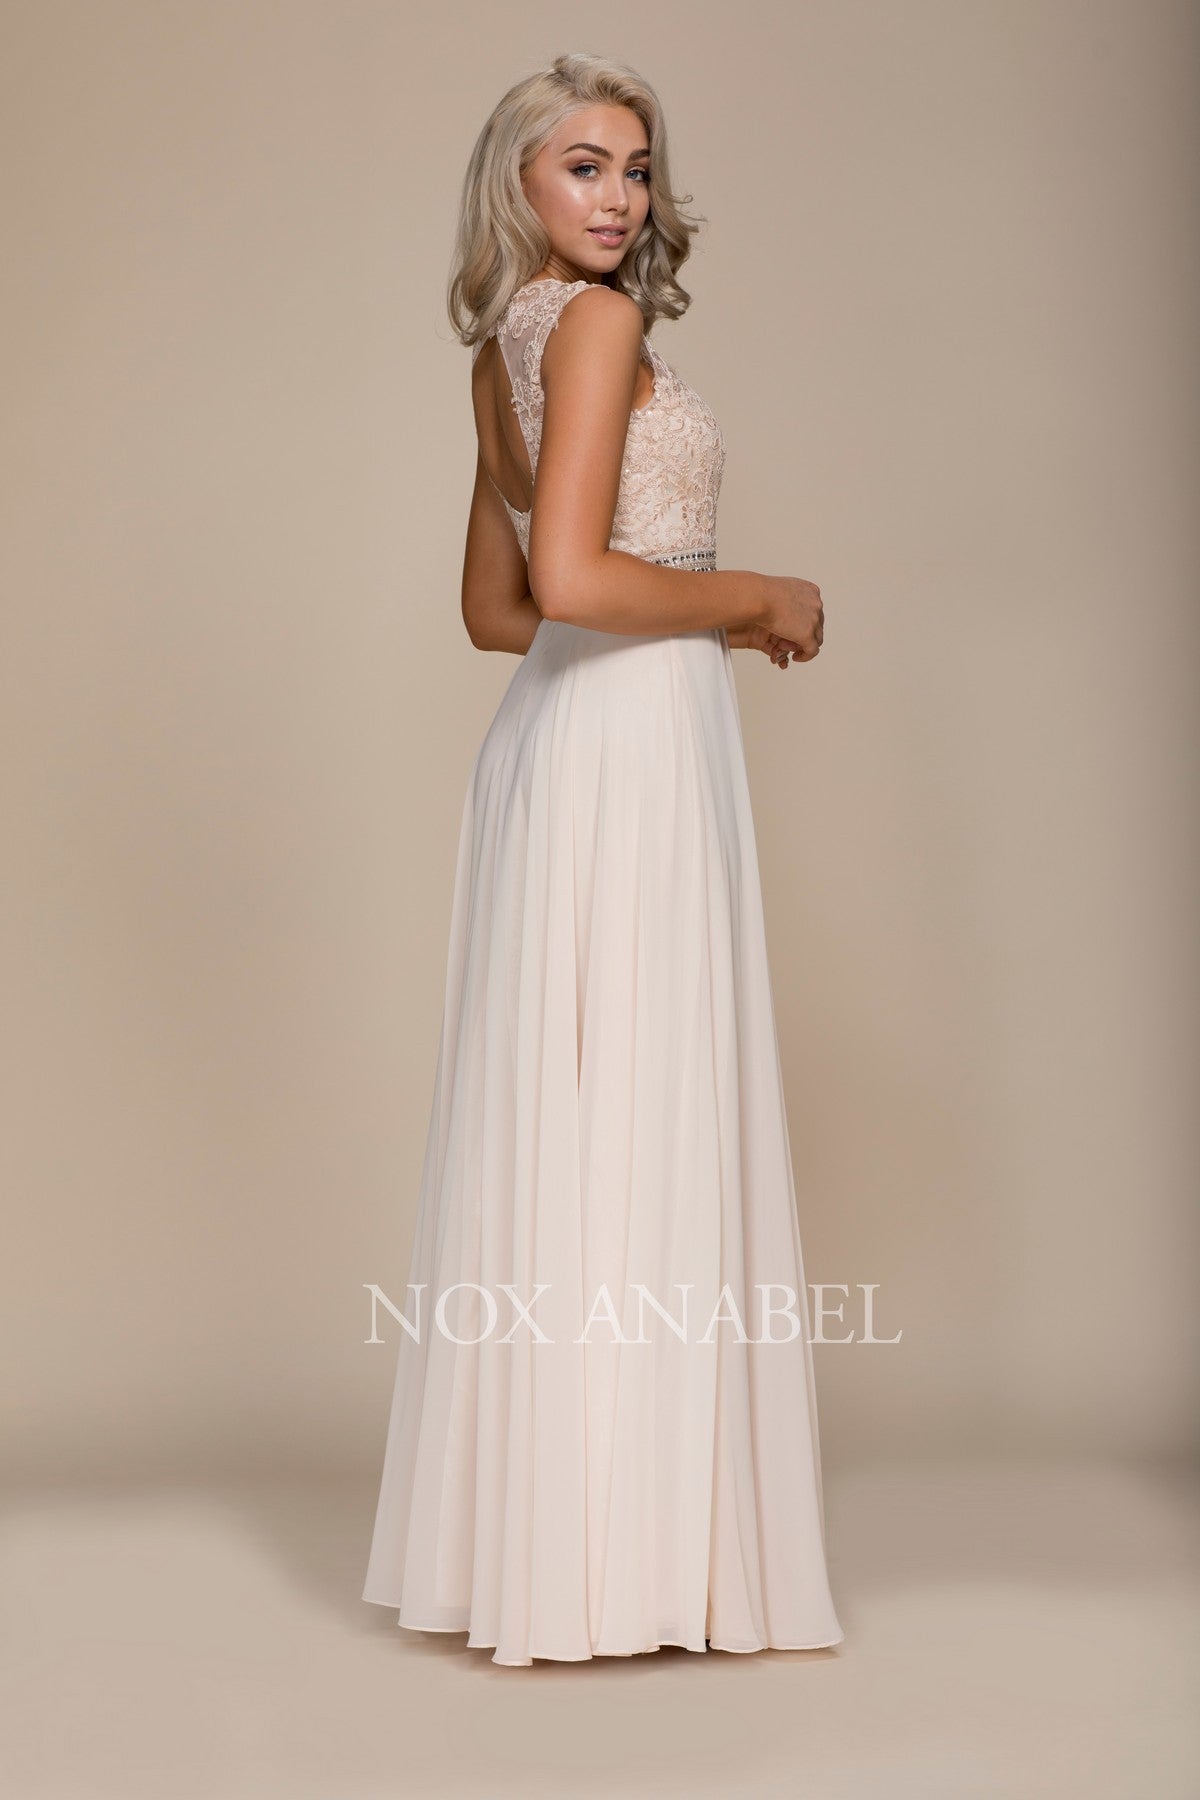 Long Sleeveless Dress With Lace Bodice By Nox Anabel -Y101